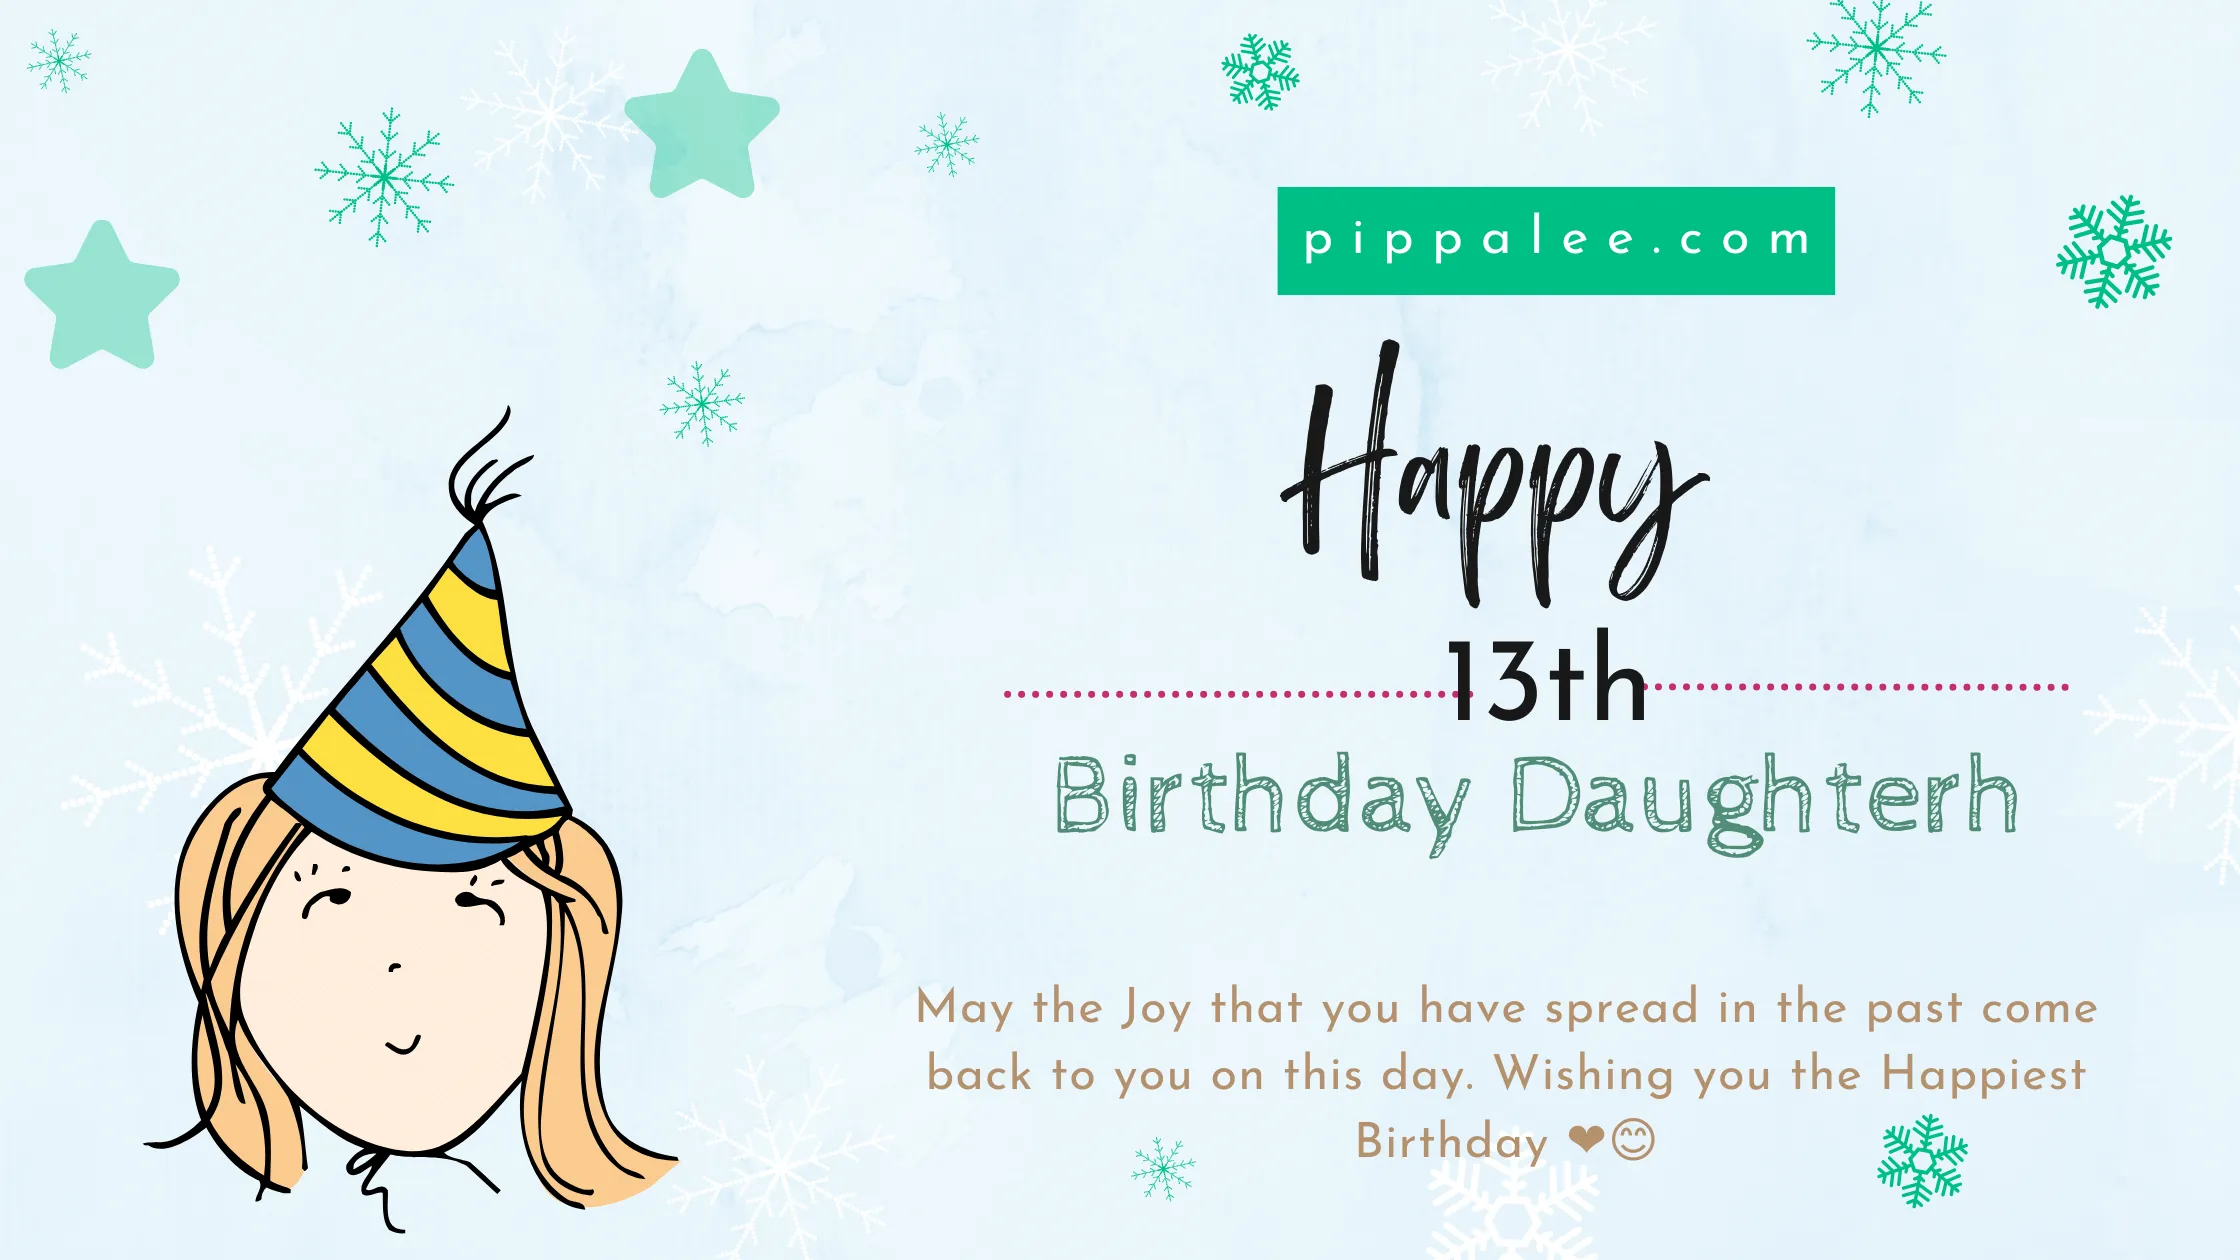 Happy 13th Birthday Daughter - Wishes & Messages